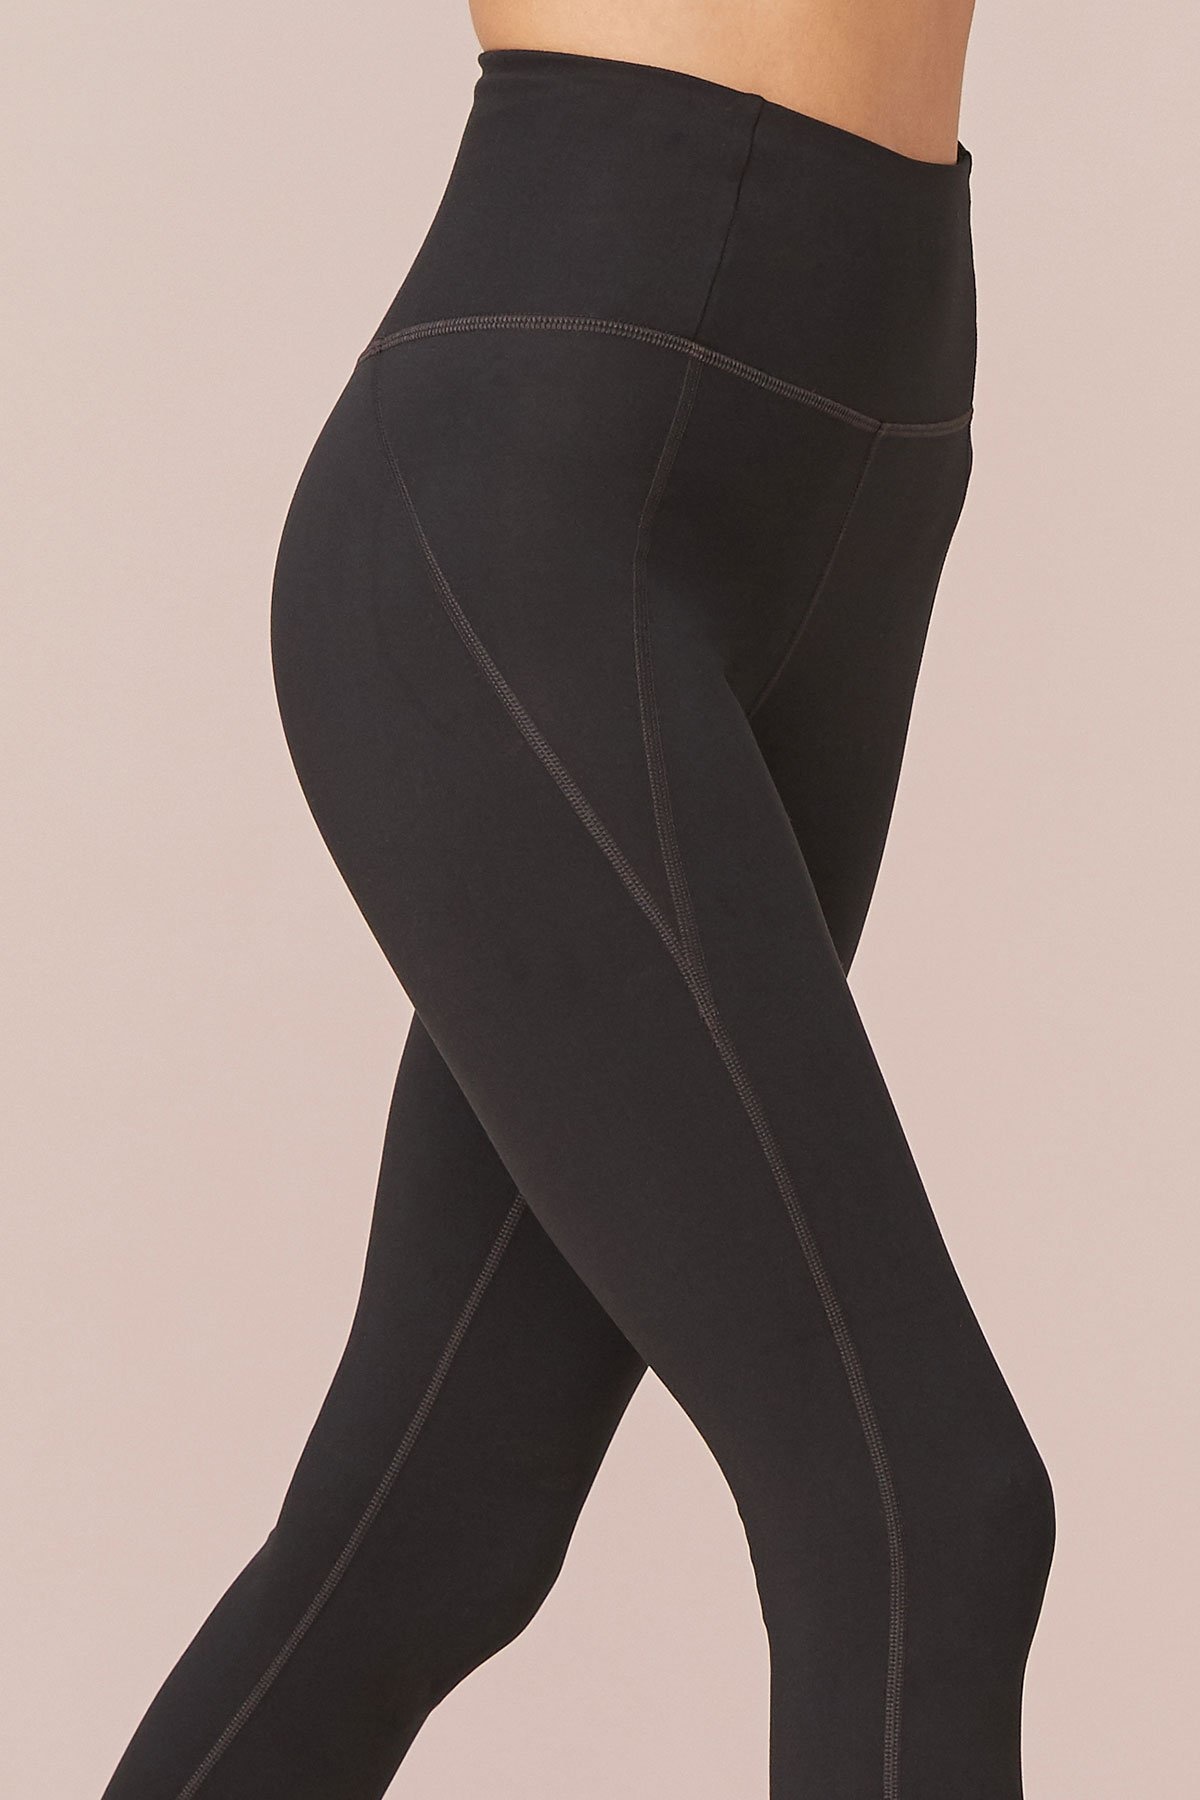 Black Compressive Leggings by Girlfriend Collective on Sale